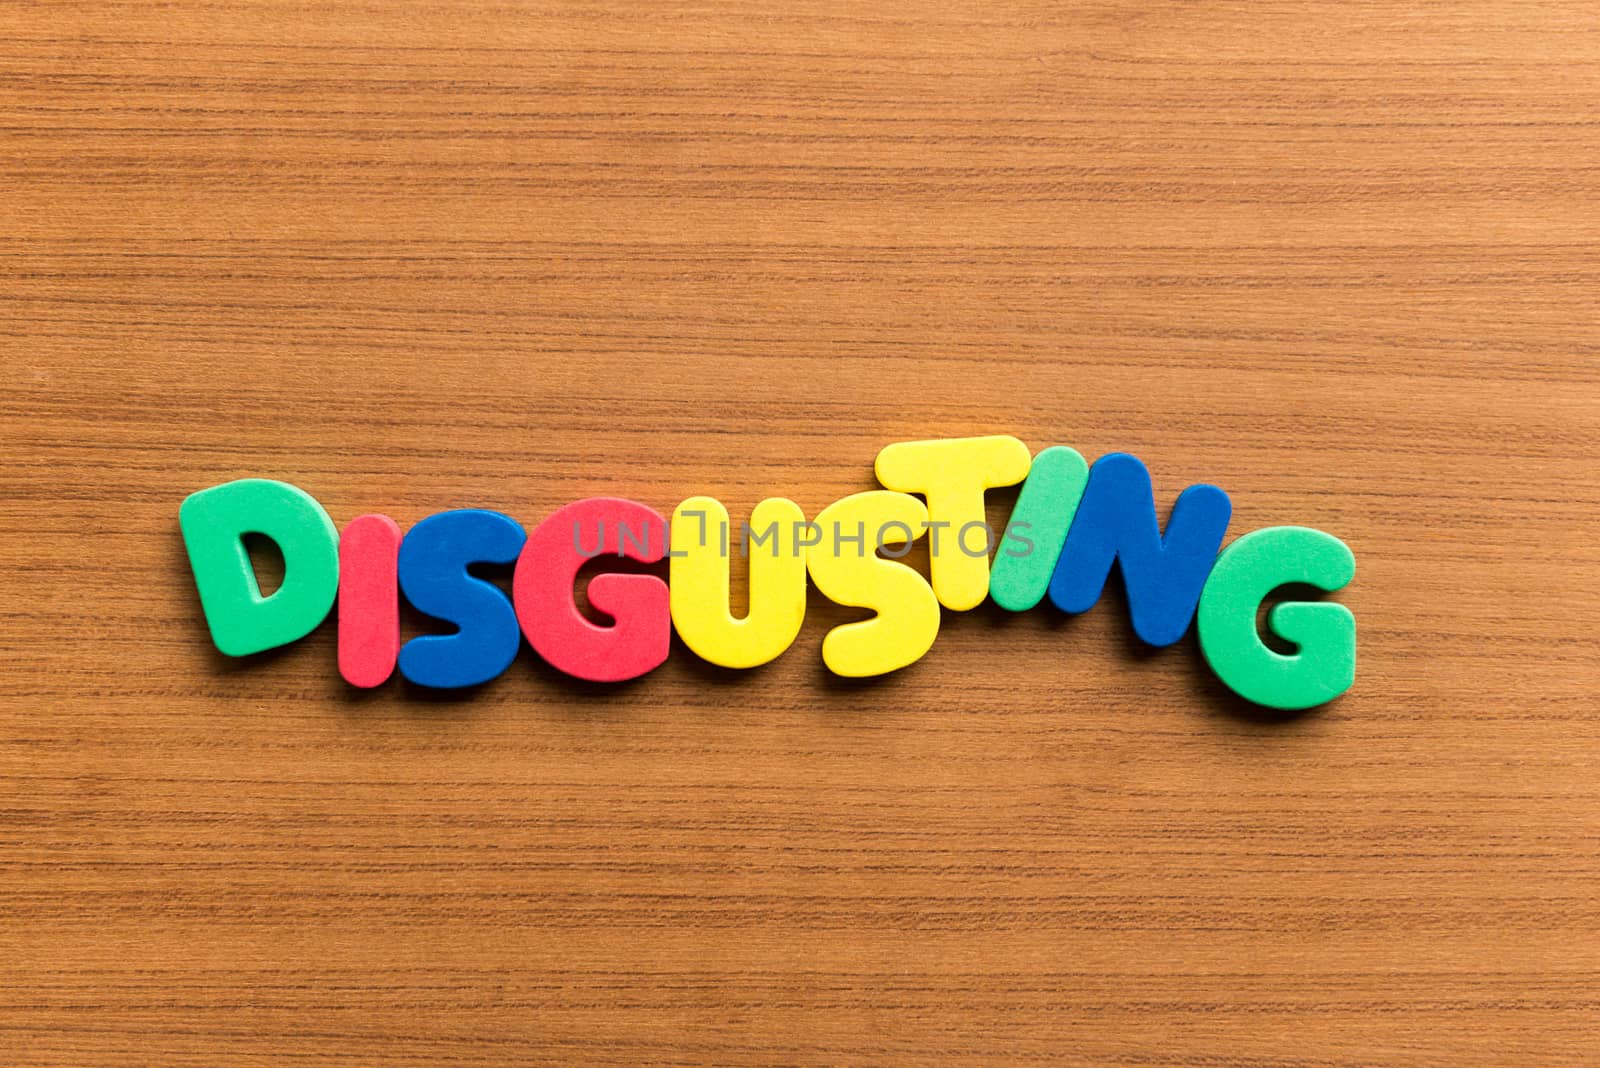 disgusting colorful word on the wooden background